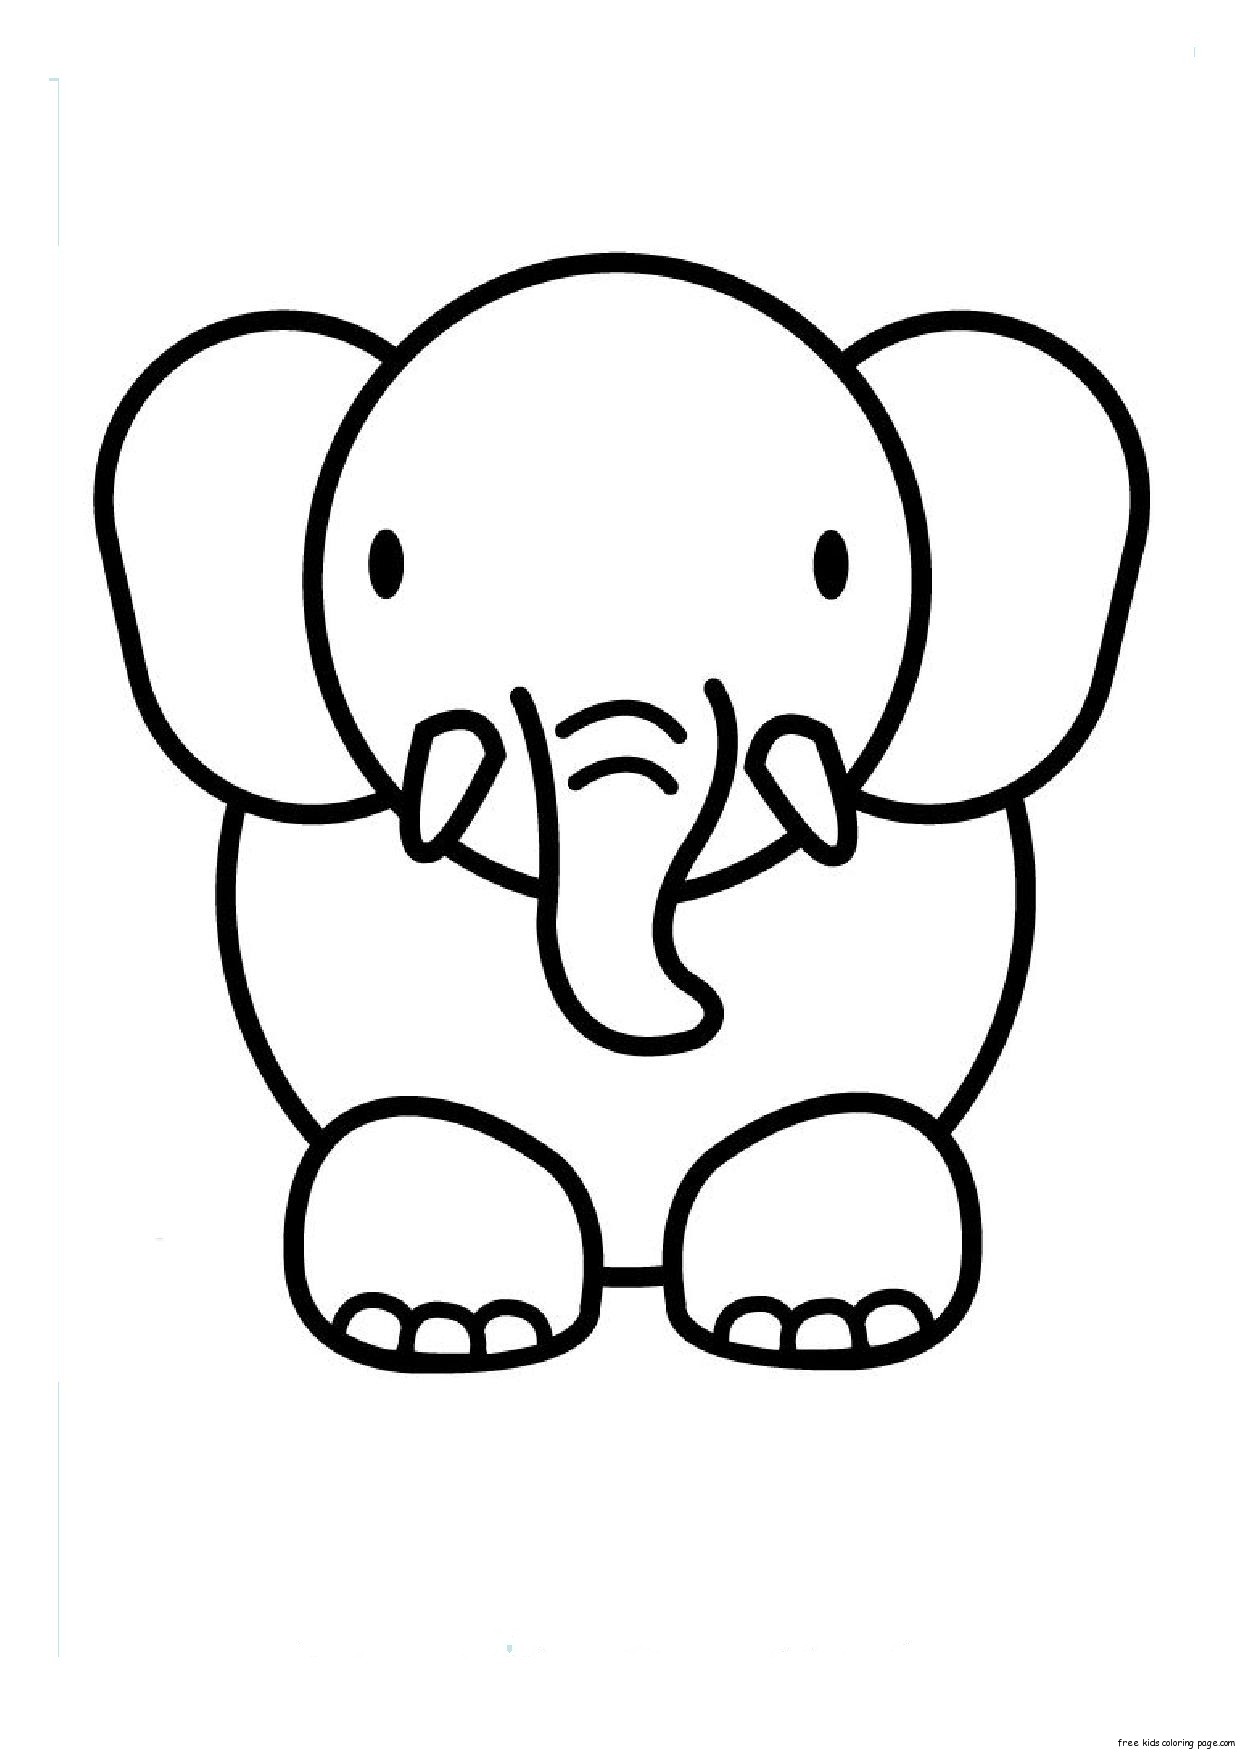 Animal Drawings For Kids To Color   ClipArt Best